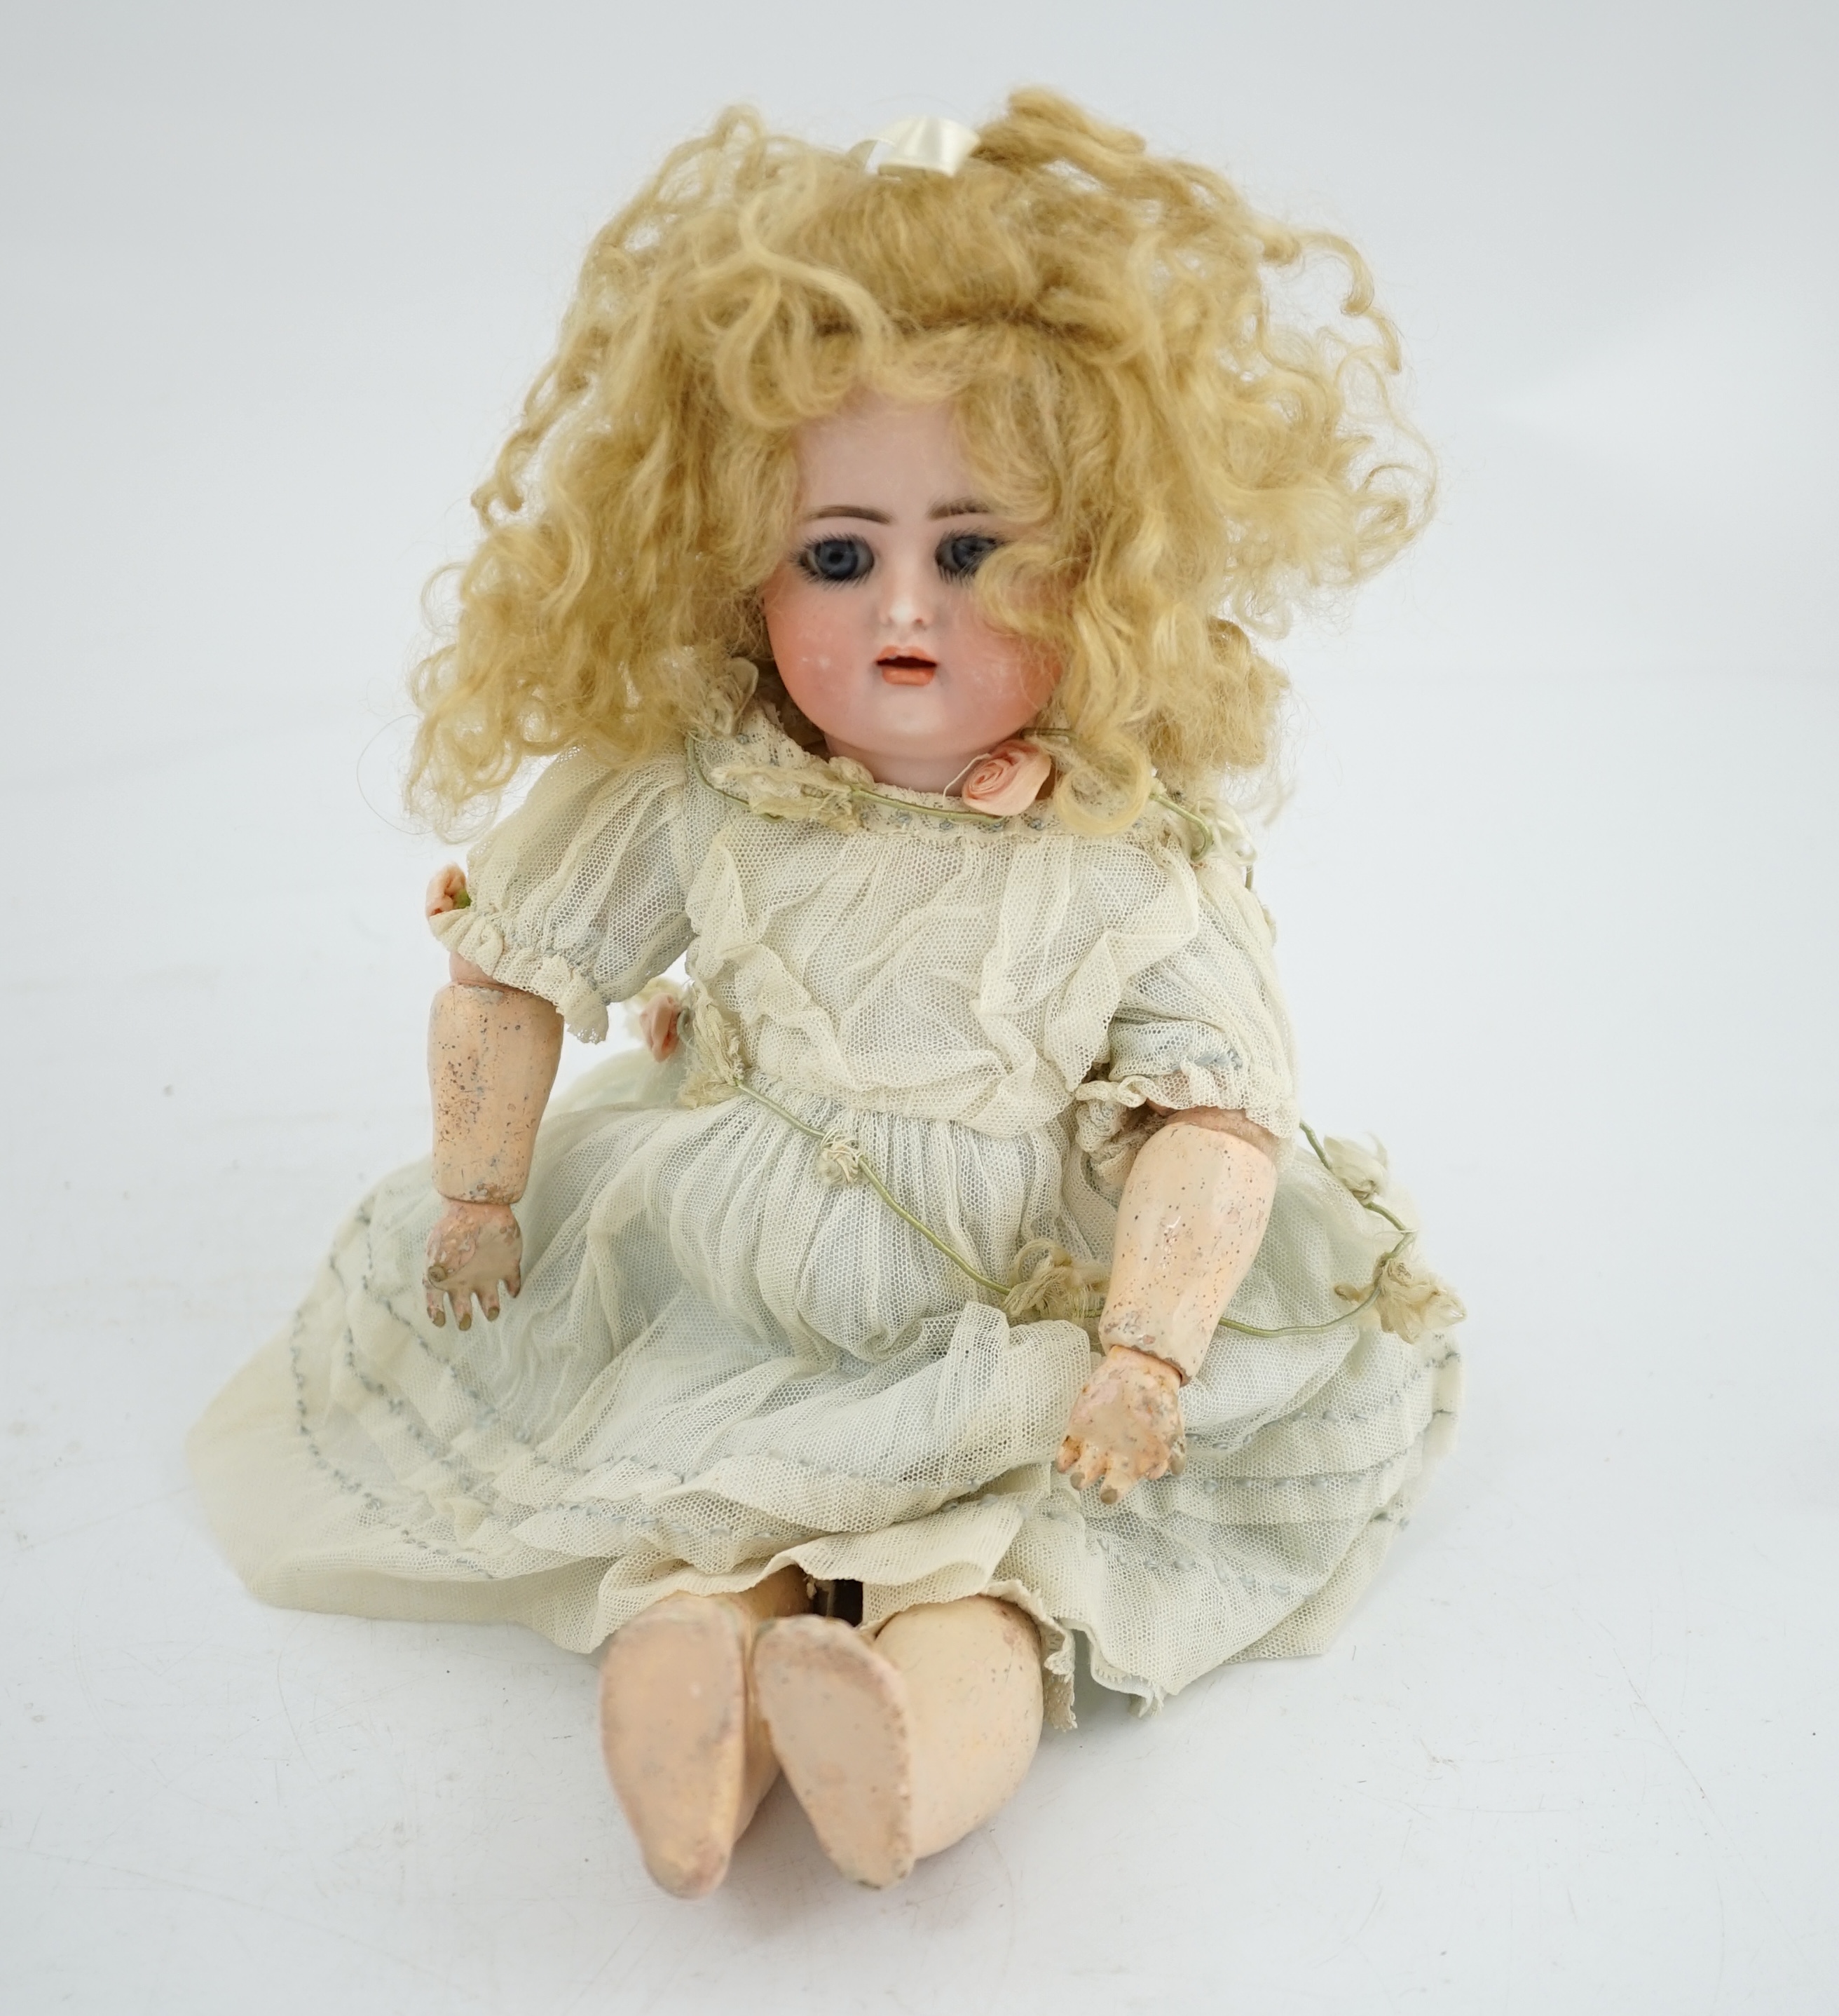 A Kammer & Reinhart / S & H bisque head doll, pierced ears, vintage clothes, one finger missing, slight rub to robe, 34cm